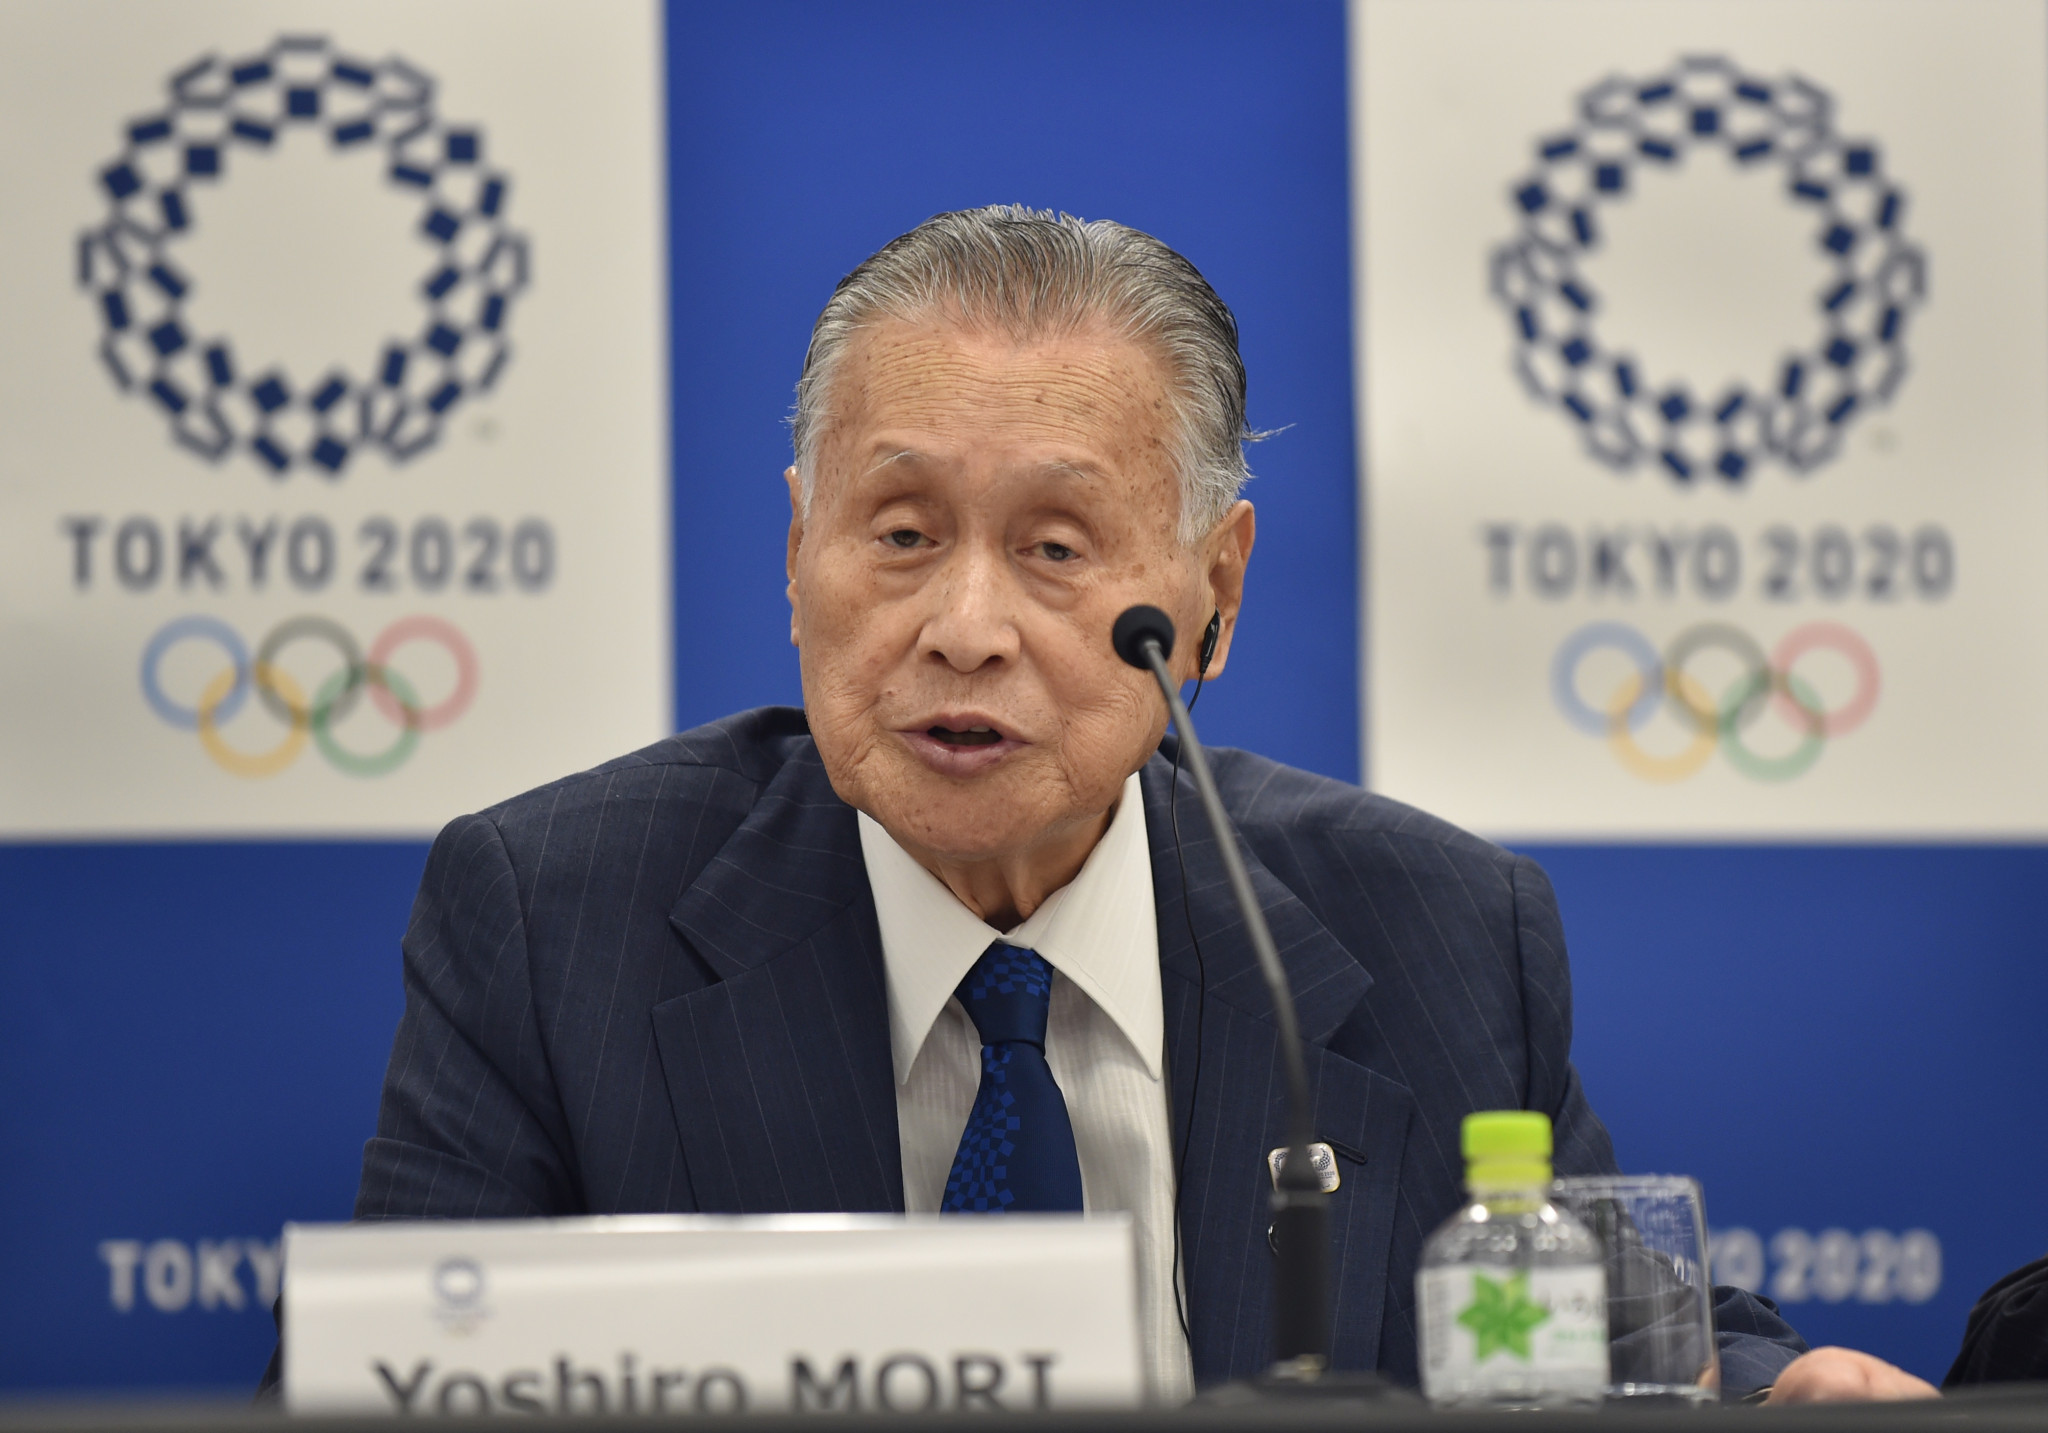 Tokyo 2020 President Yoshiro Mori warned the WBSC that extra matches would mean extra cost for organisers ©Getty Images